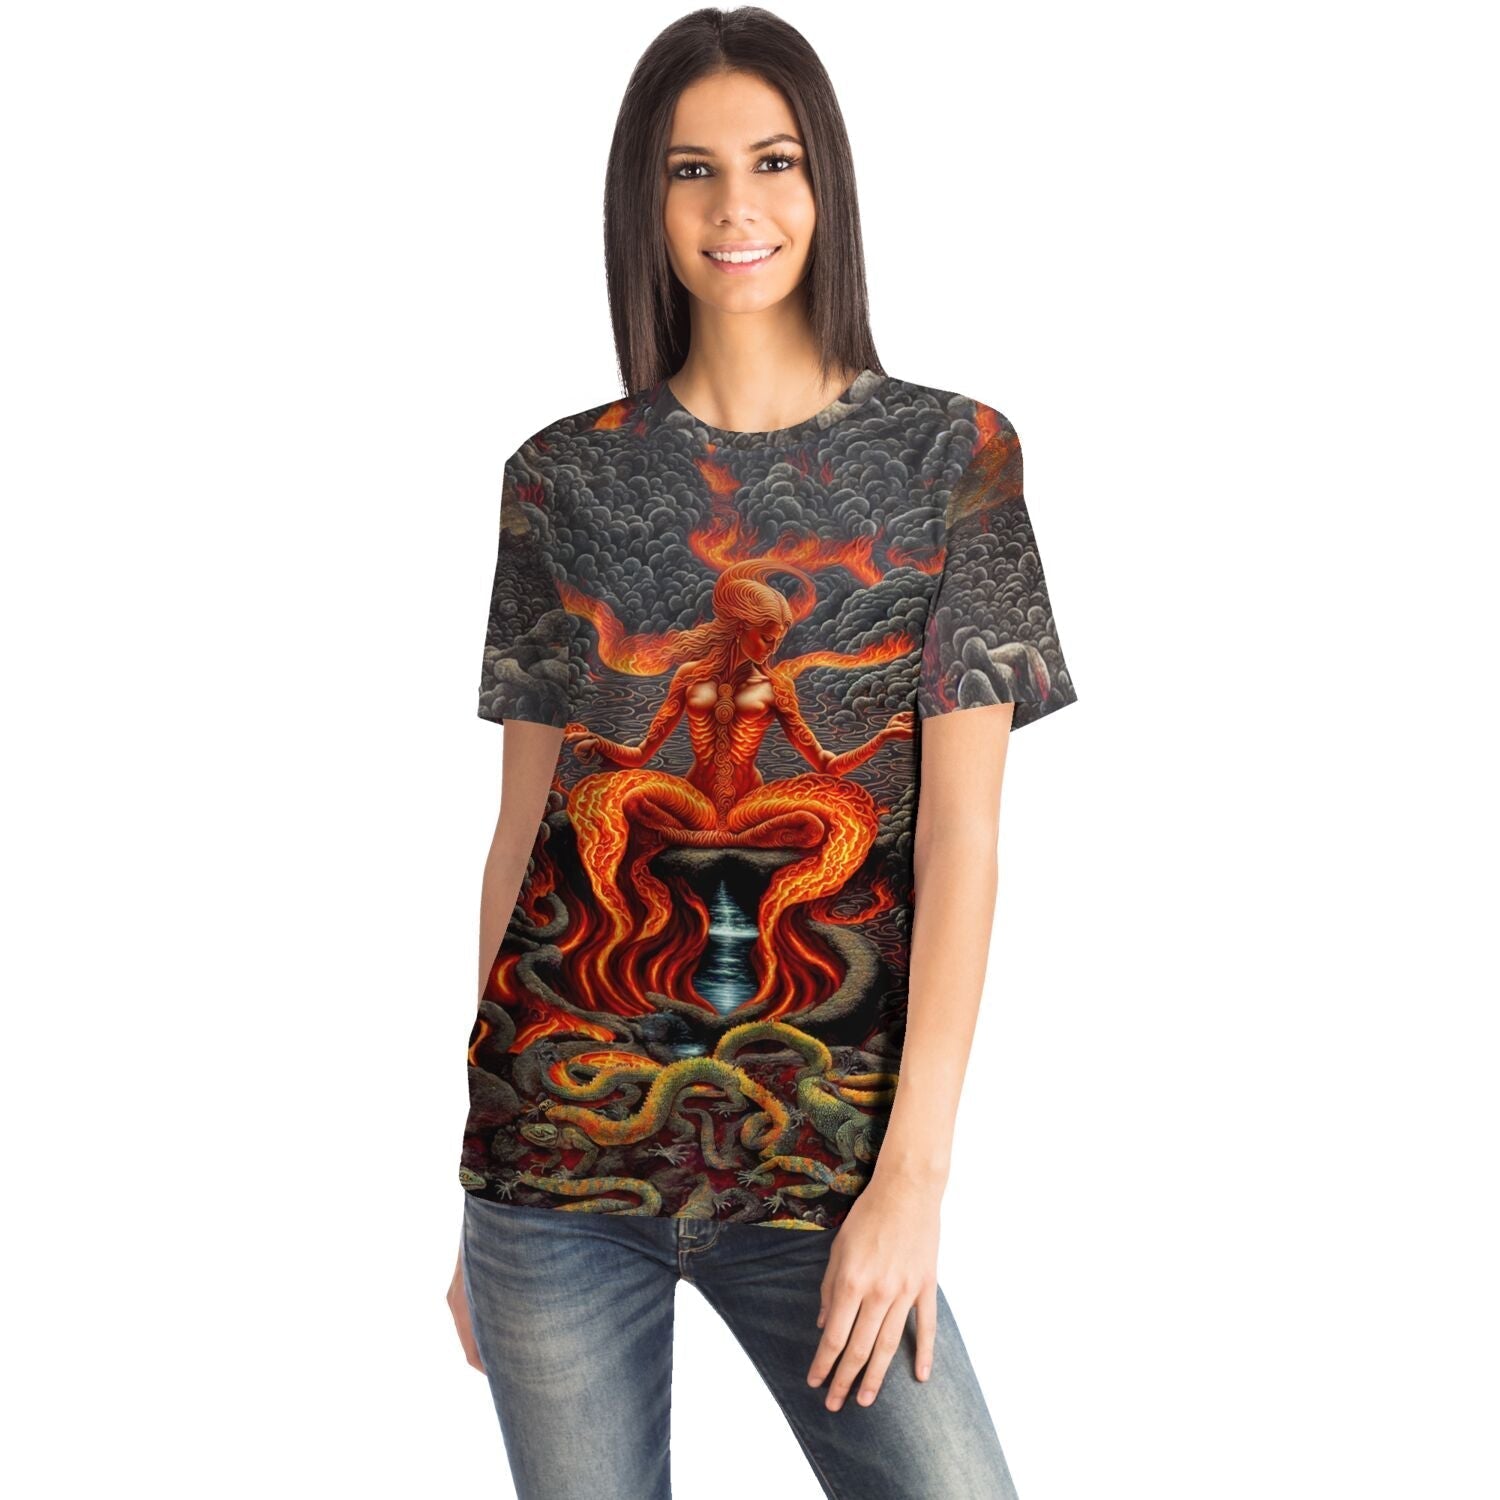 T-shirt Gaia: Elemental Goddess of Earth, Wind, Fire, Water | Mother Earth, Born out of Chaos | Empowered Woman, James Lovelock Graphic Art T-Shirt